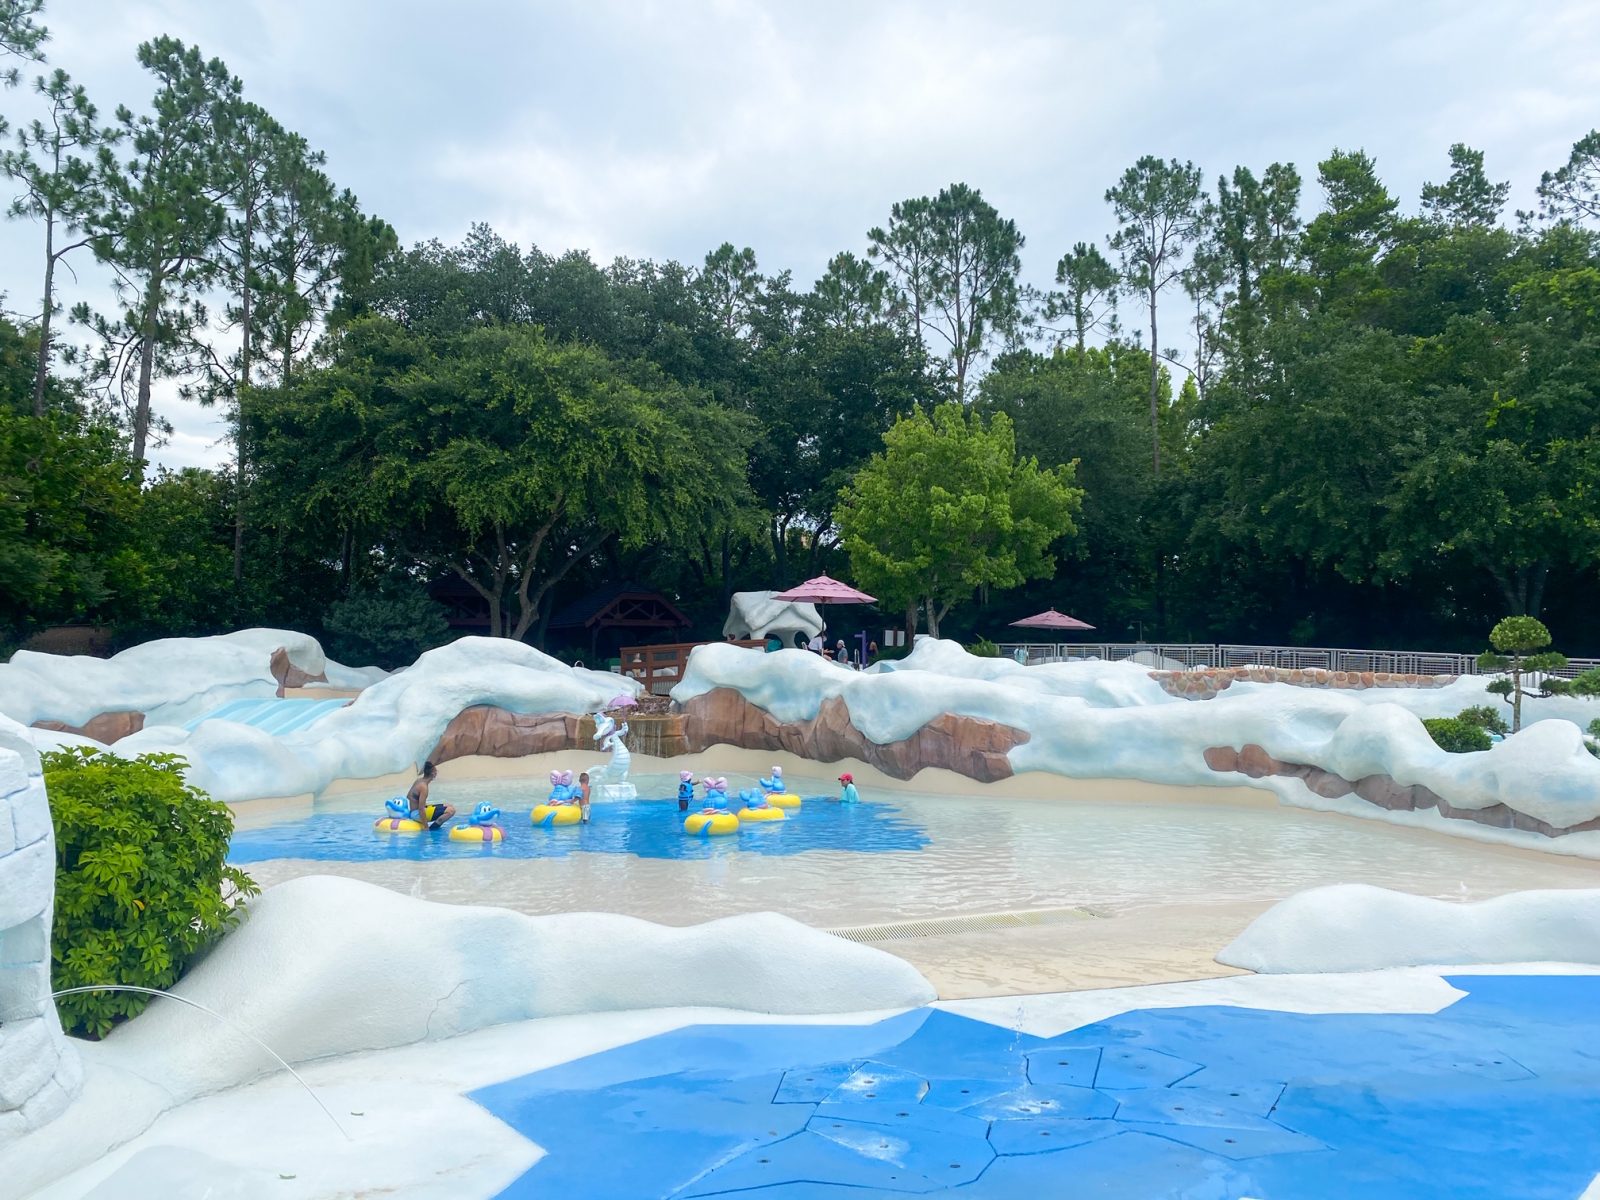 splash pad for kids, fake snow drifts, trees and clouds